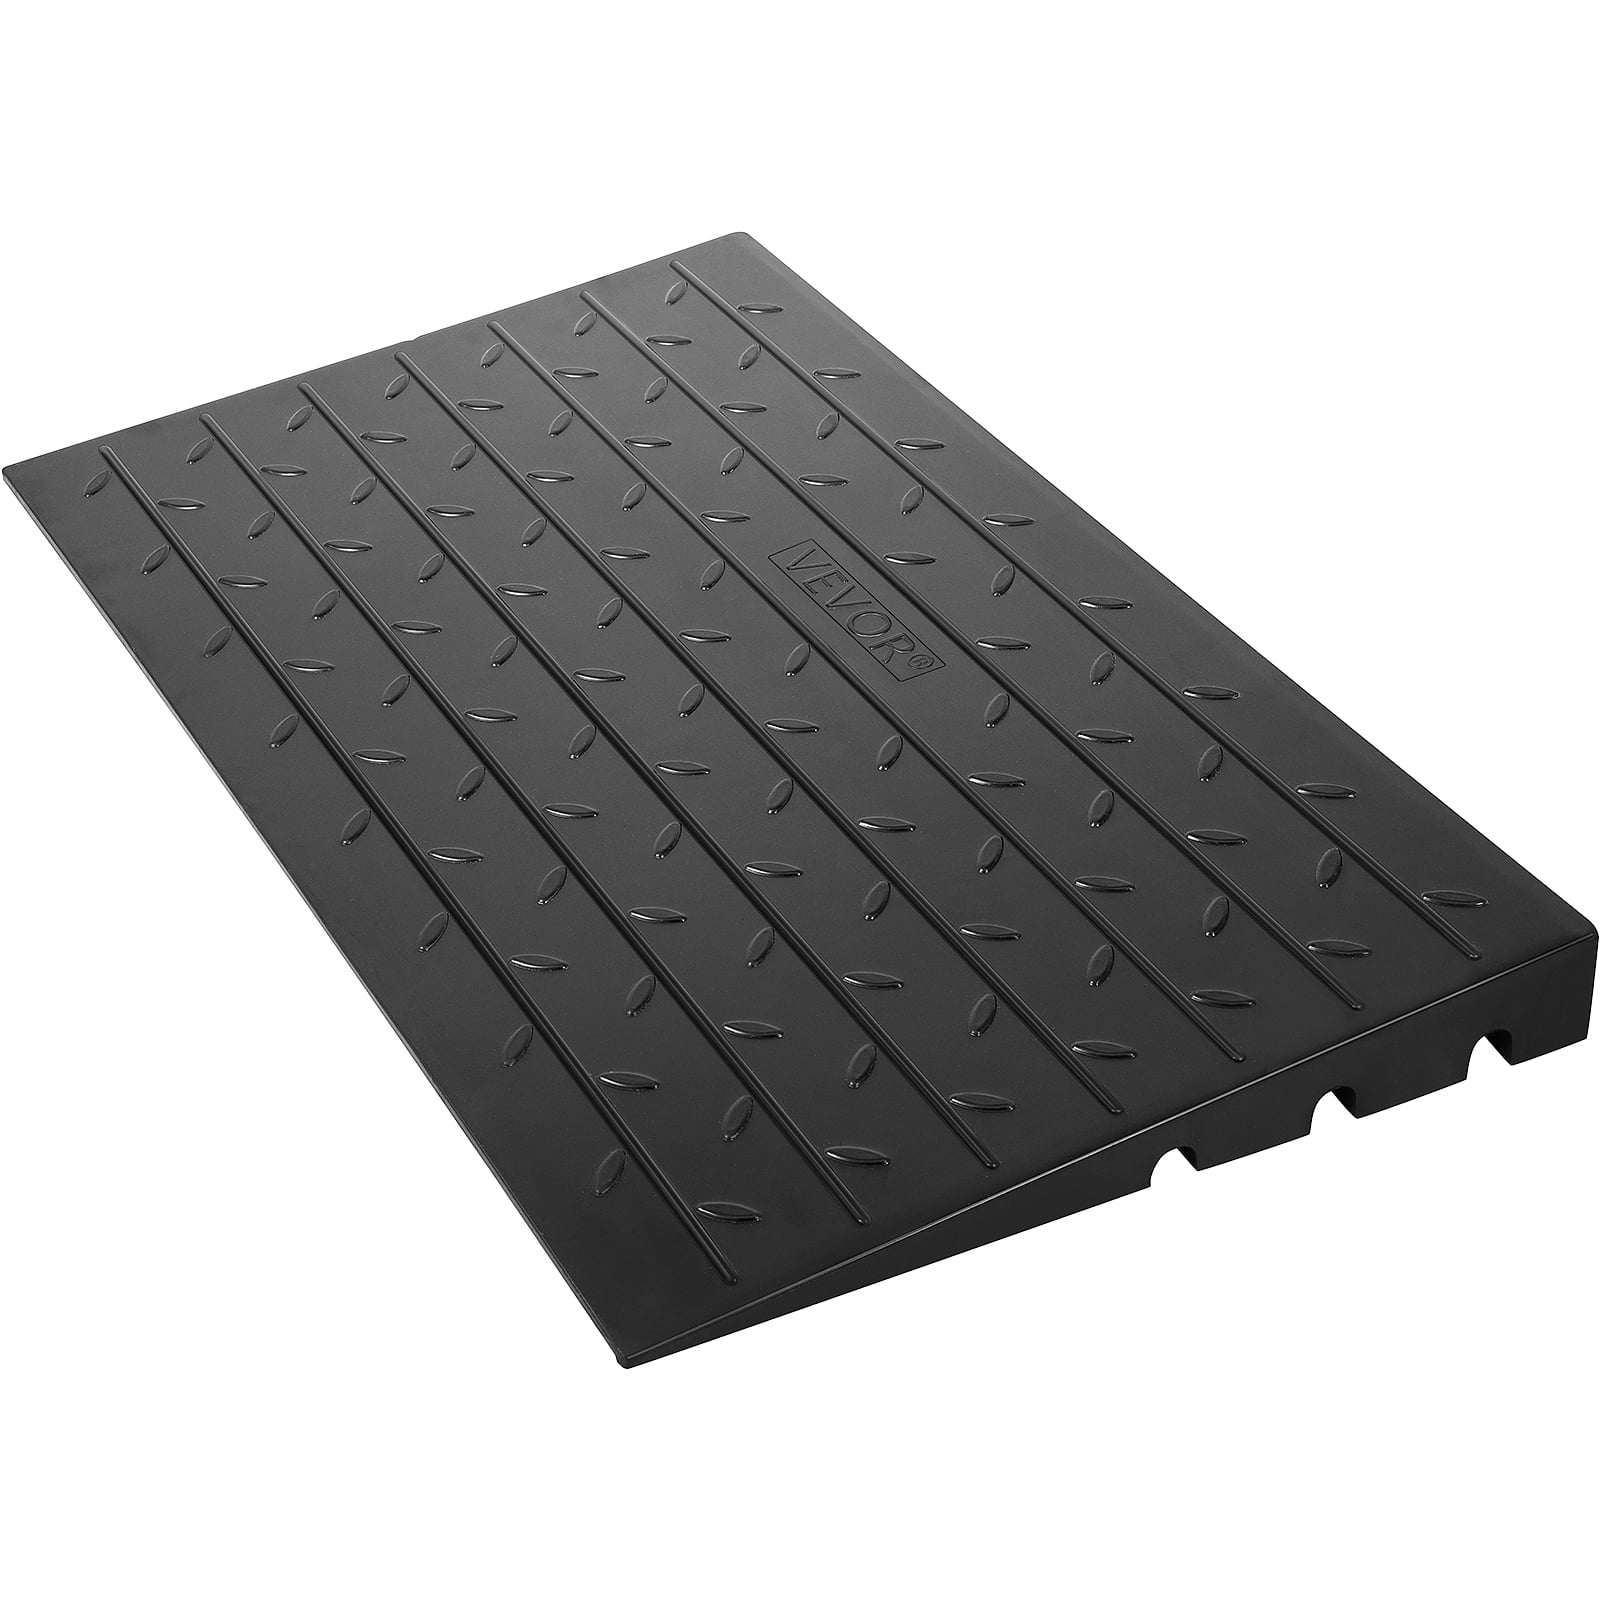 Speedmax 3 Rise Solid Rubber Threshold Ramp for Wheelchair Scooter Doorway 1 Pack 43.3 x 8 x 3 Threshold Ramps 3 High, 1 Pack 